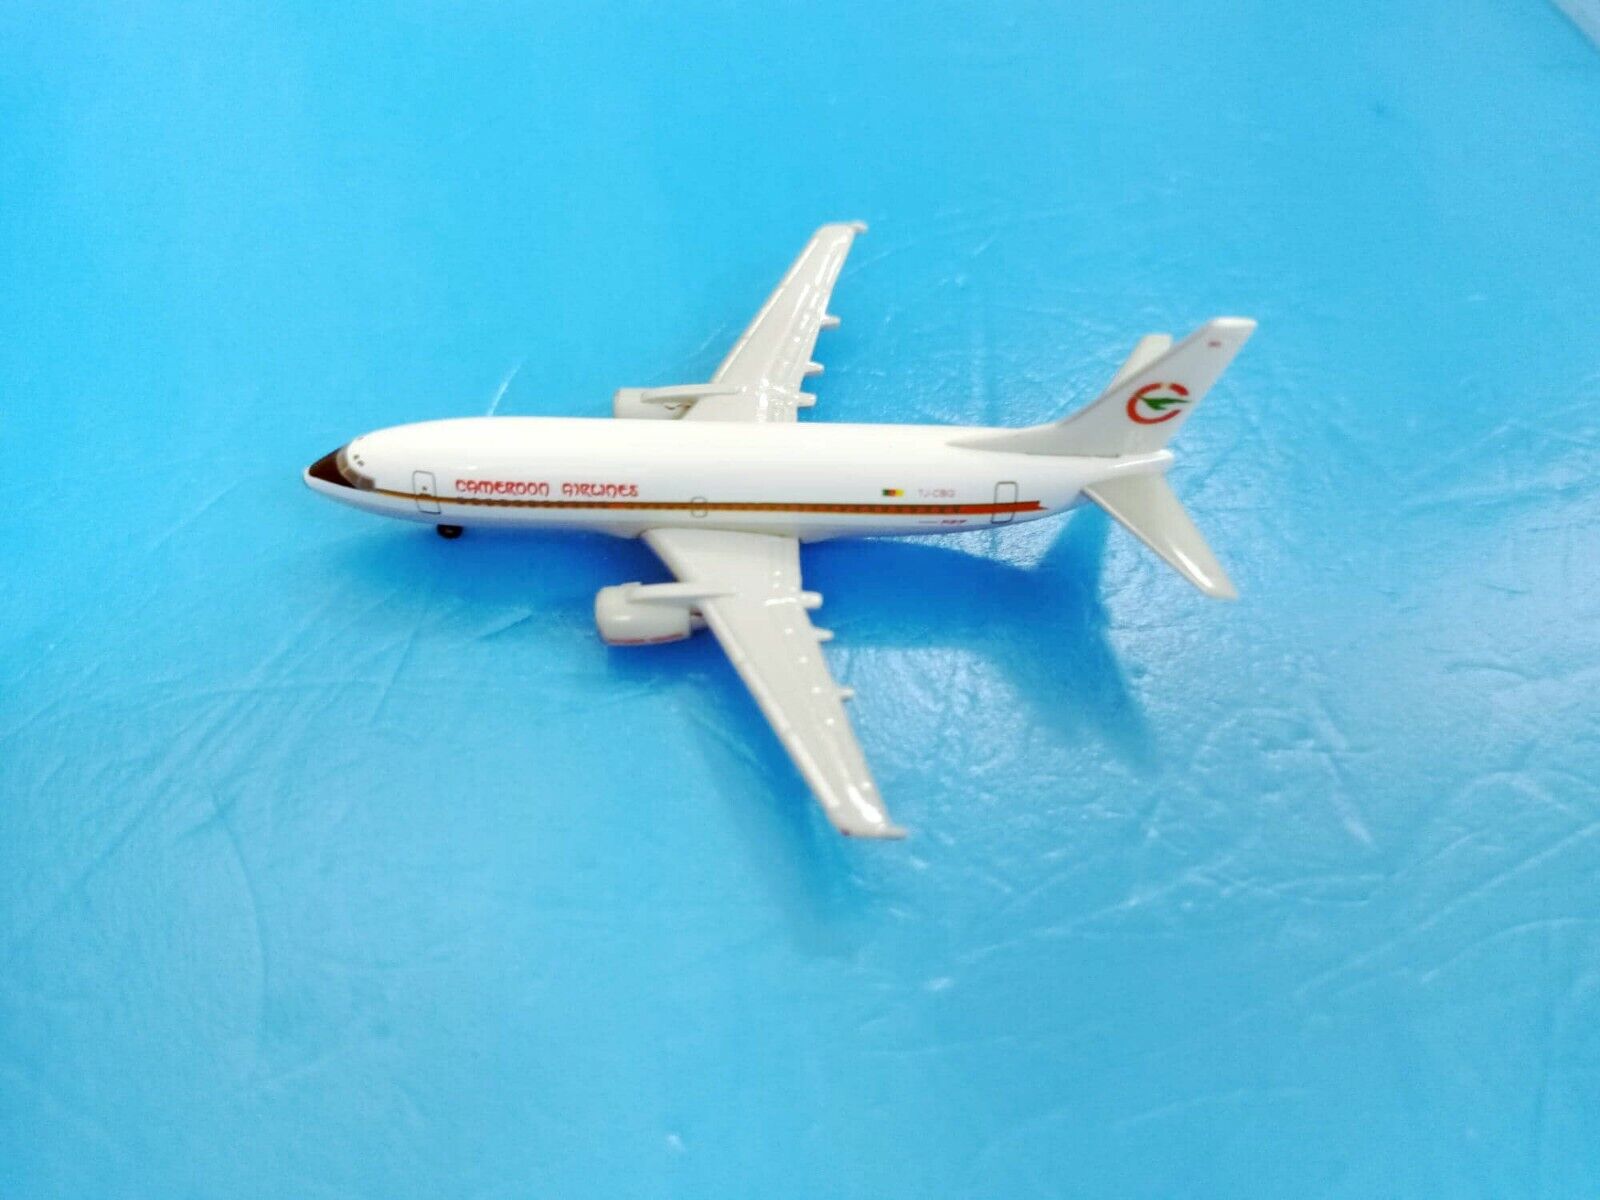 Extremely RARE Herpa Wings SAMPLE 1:500 CAMEROON AIRLINES B737-300 TJ-CBG MODEL